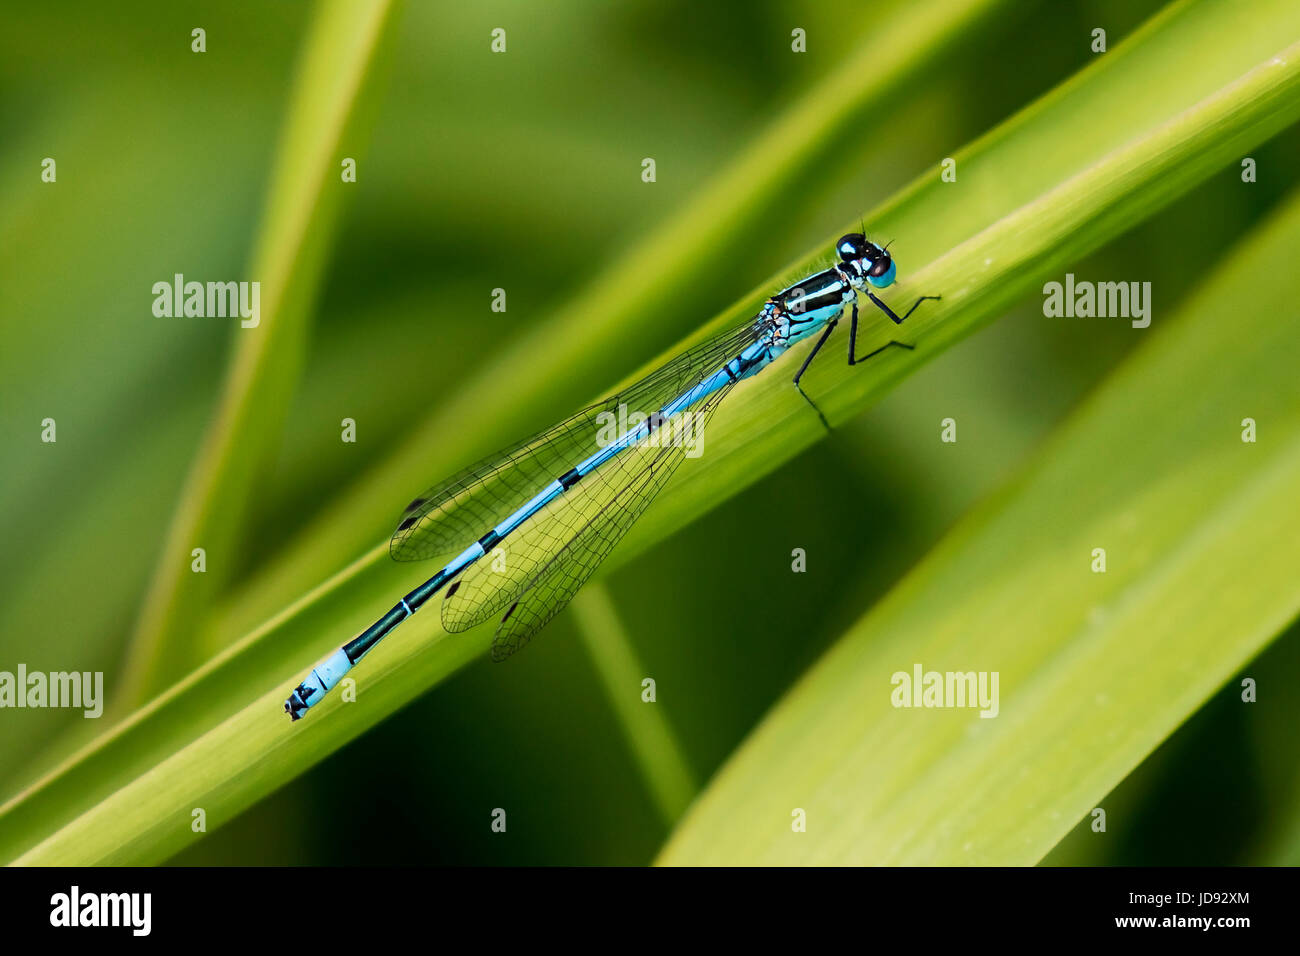 A Beautiful Azure Blue Damsel Fly on a Reed stalk Stock Photo